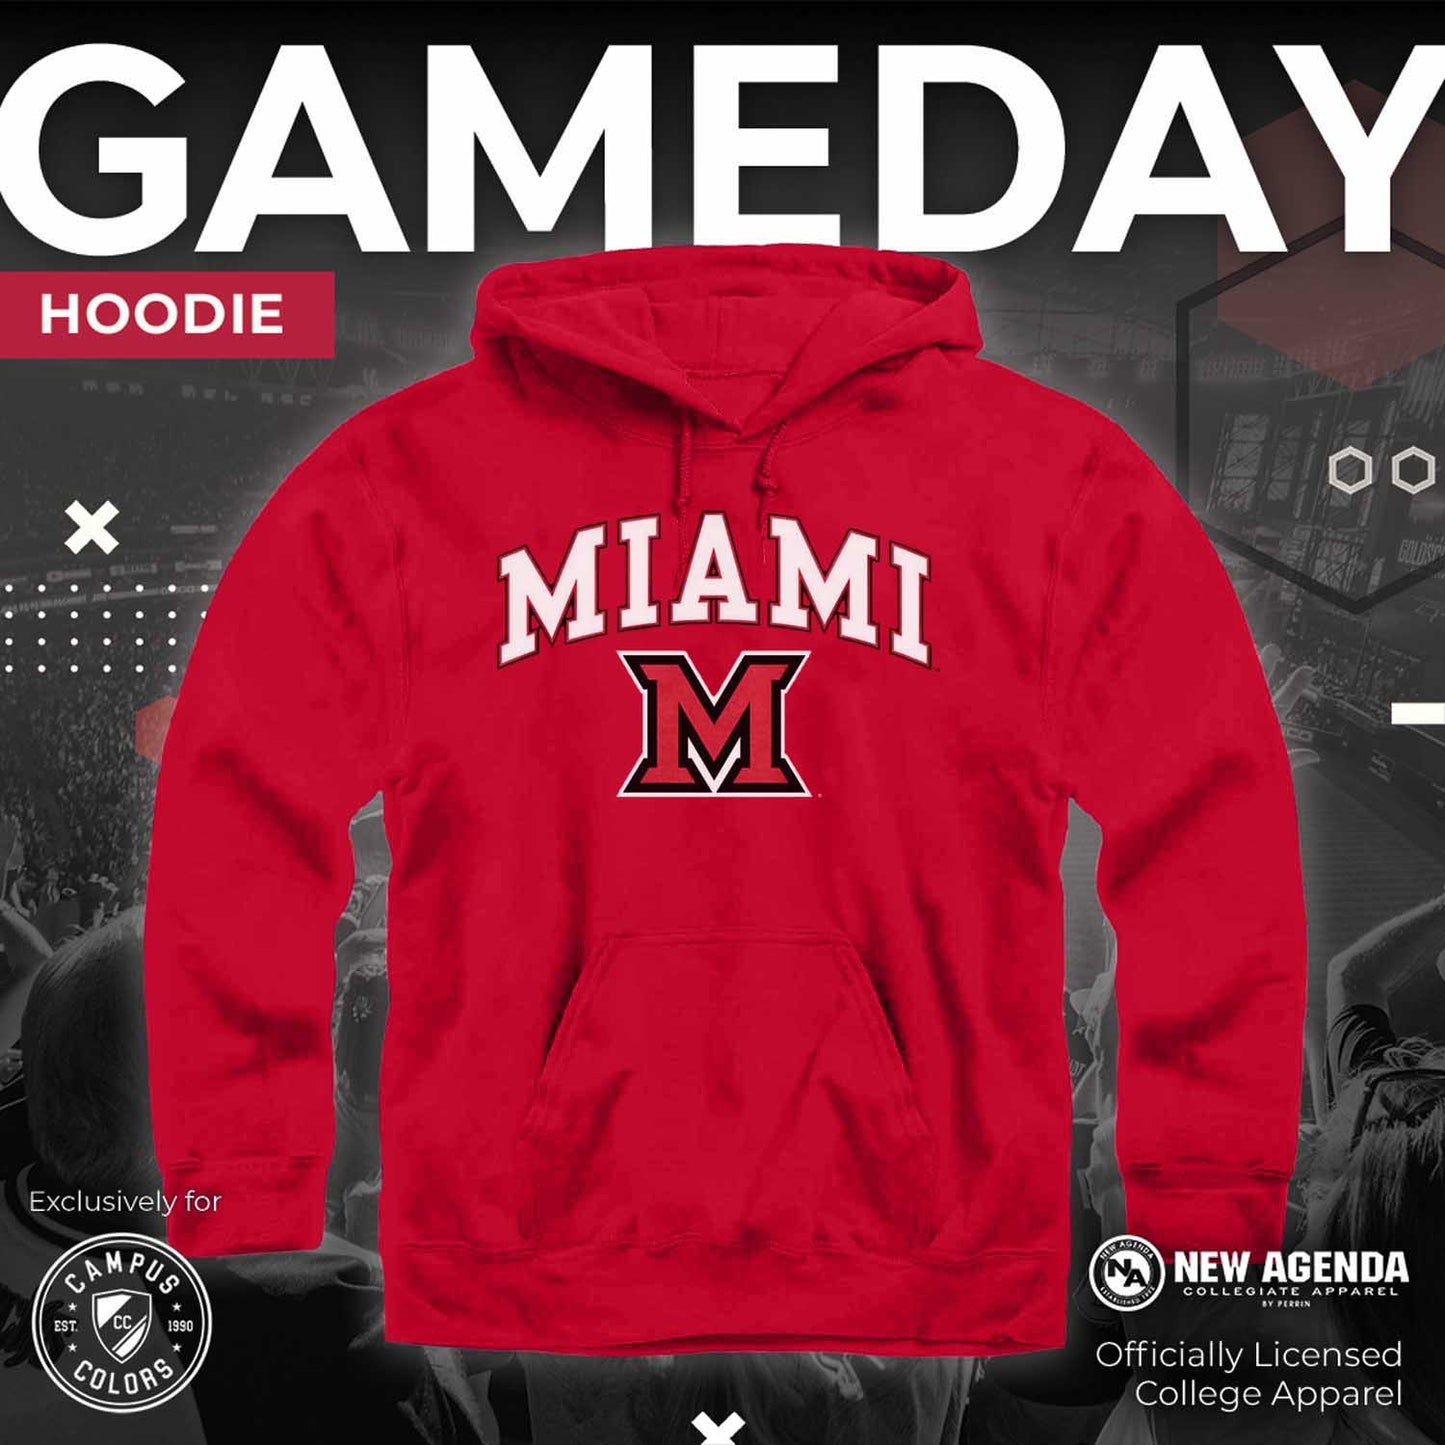 Miami Redhawks Adult Arch & Logo Soft Style Gameday Hooded Sweatshirt - Red